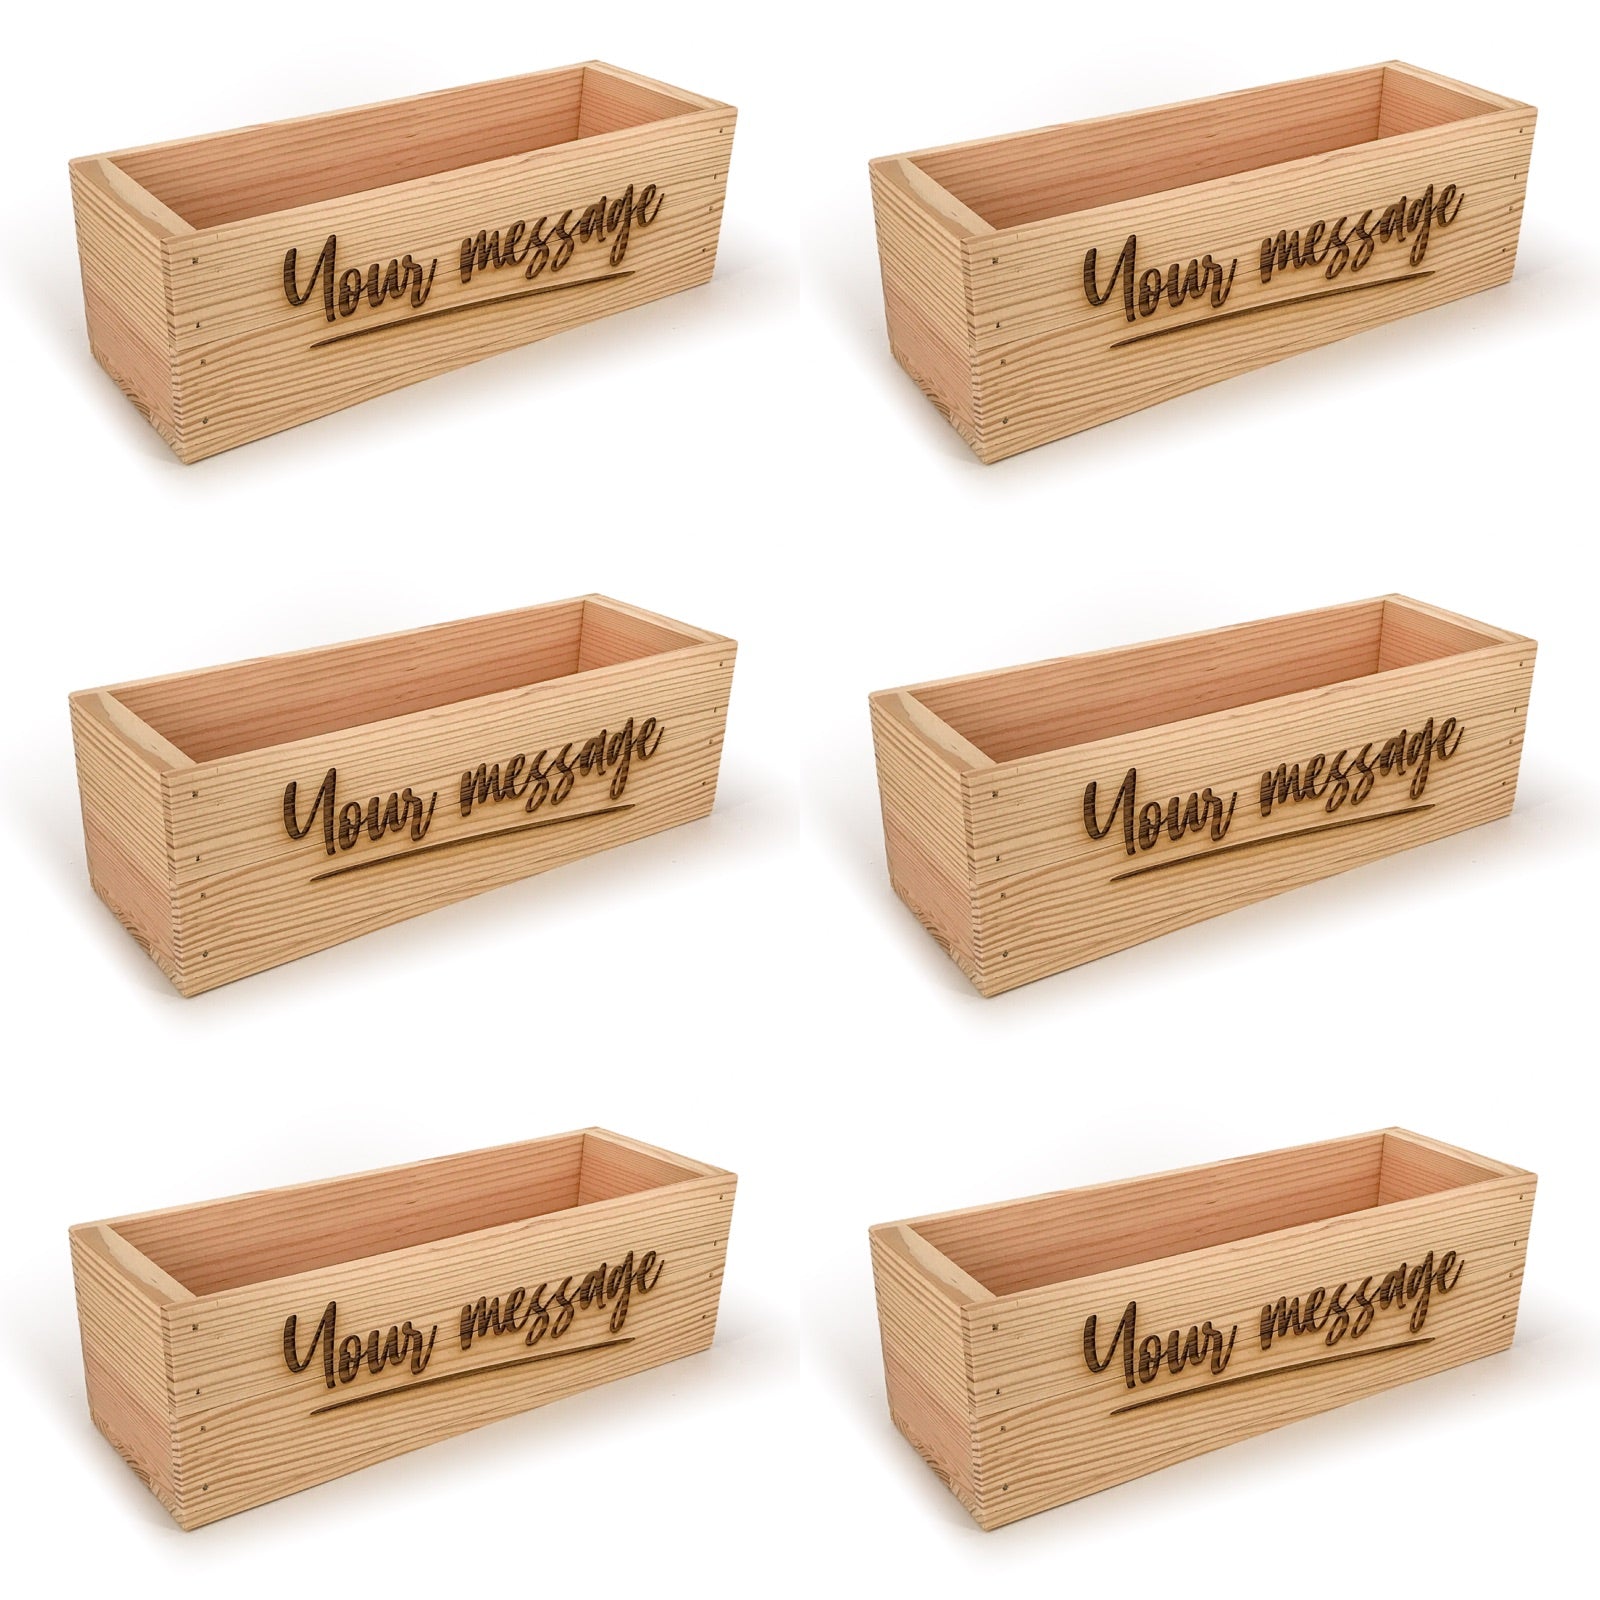 6 Single Bottle Wine Crate Box with Custom Message 14x4.5x4.5